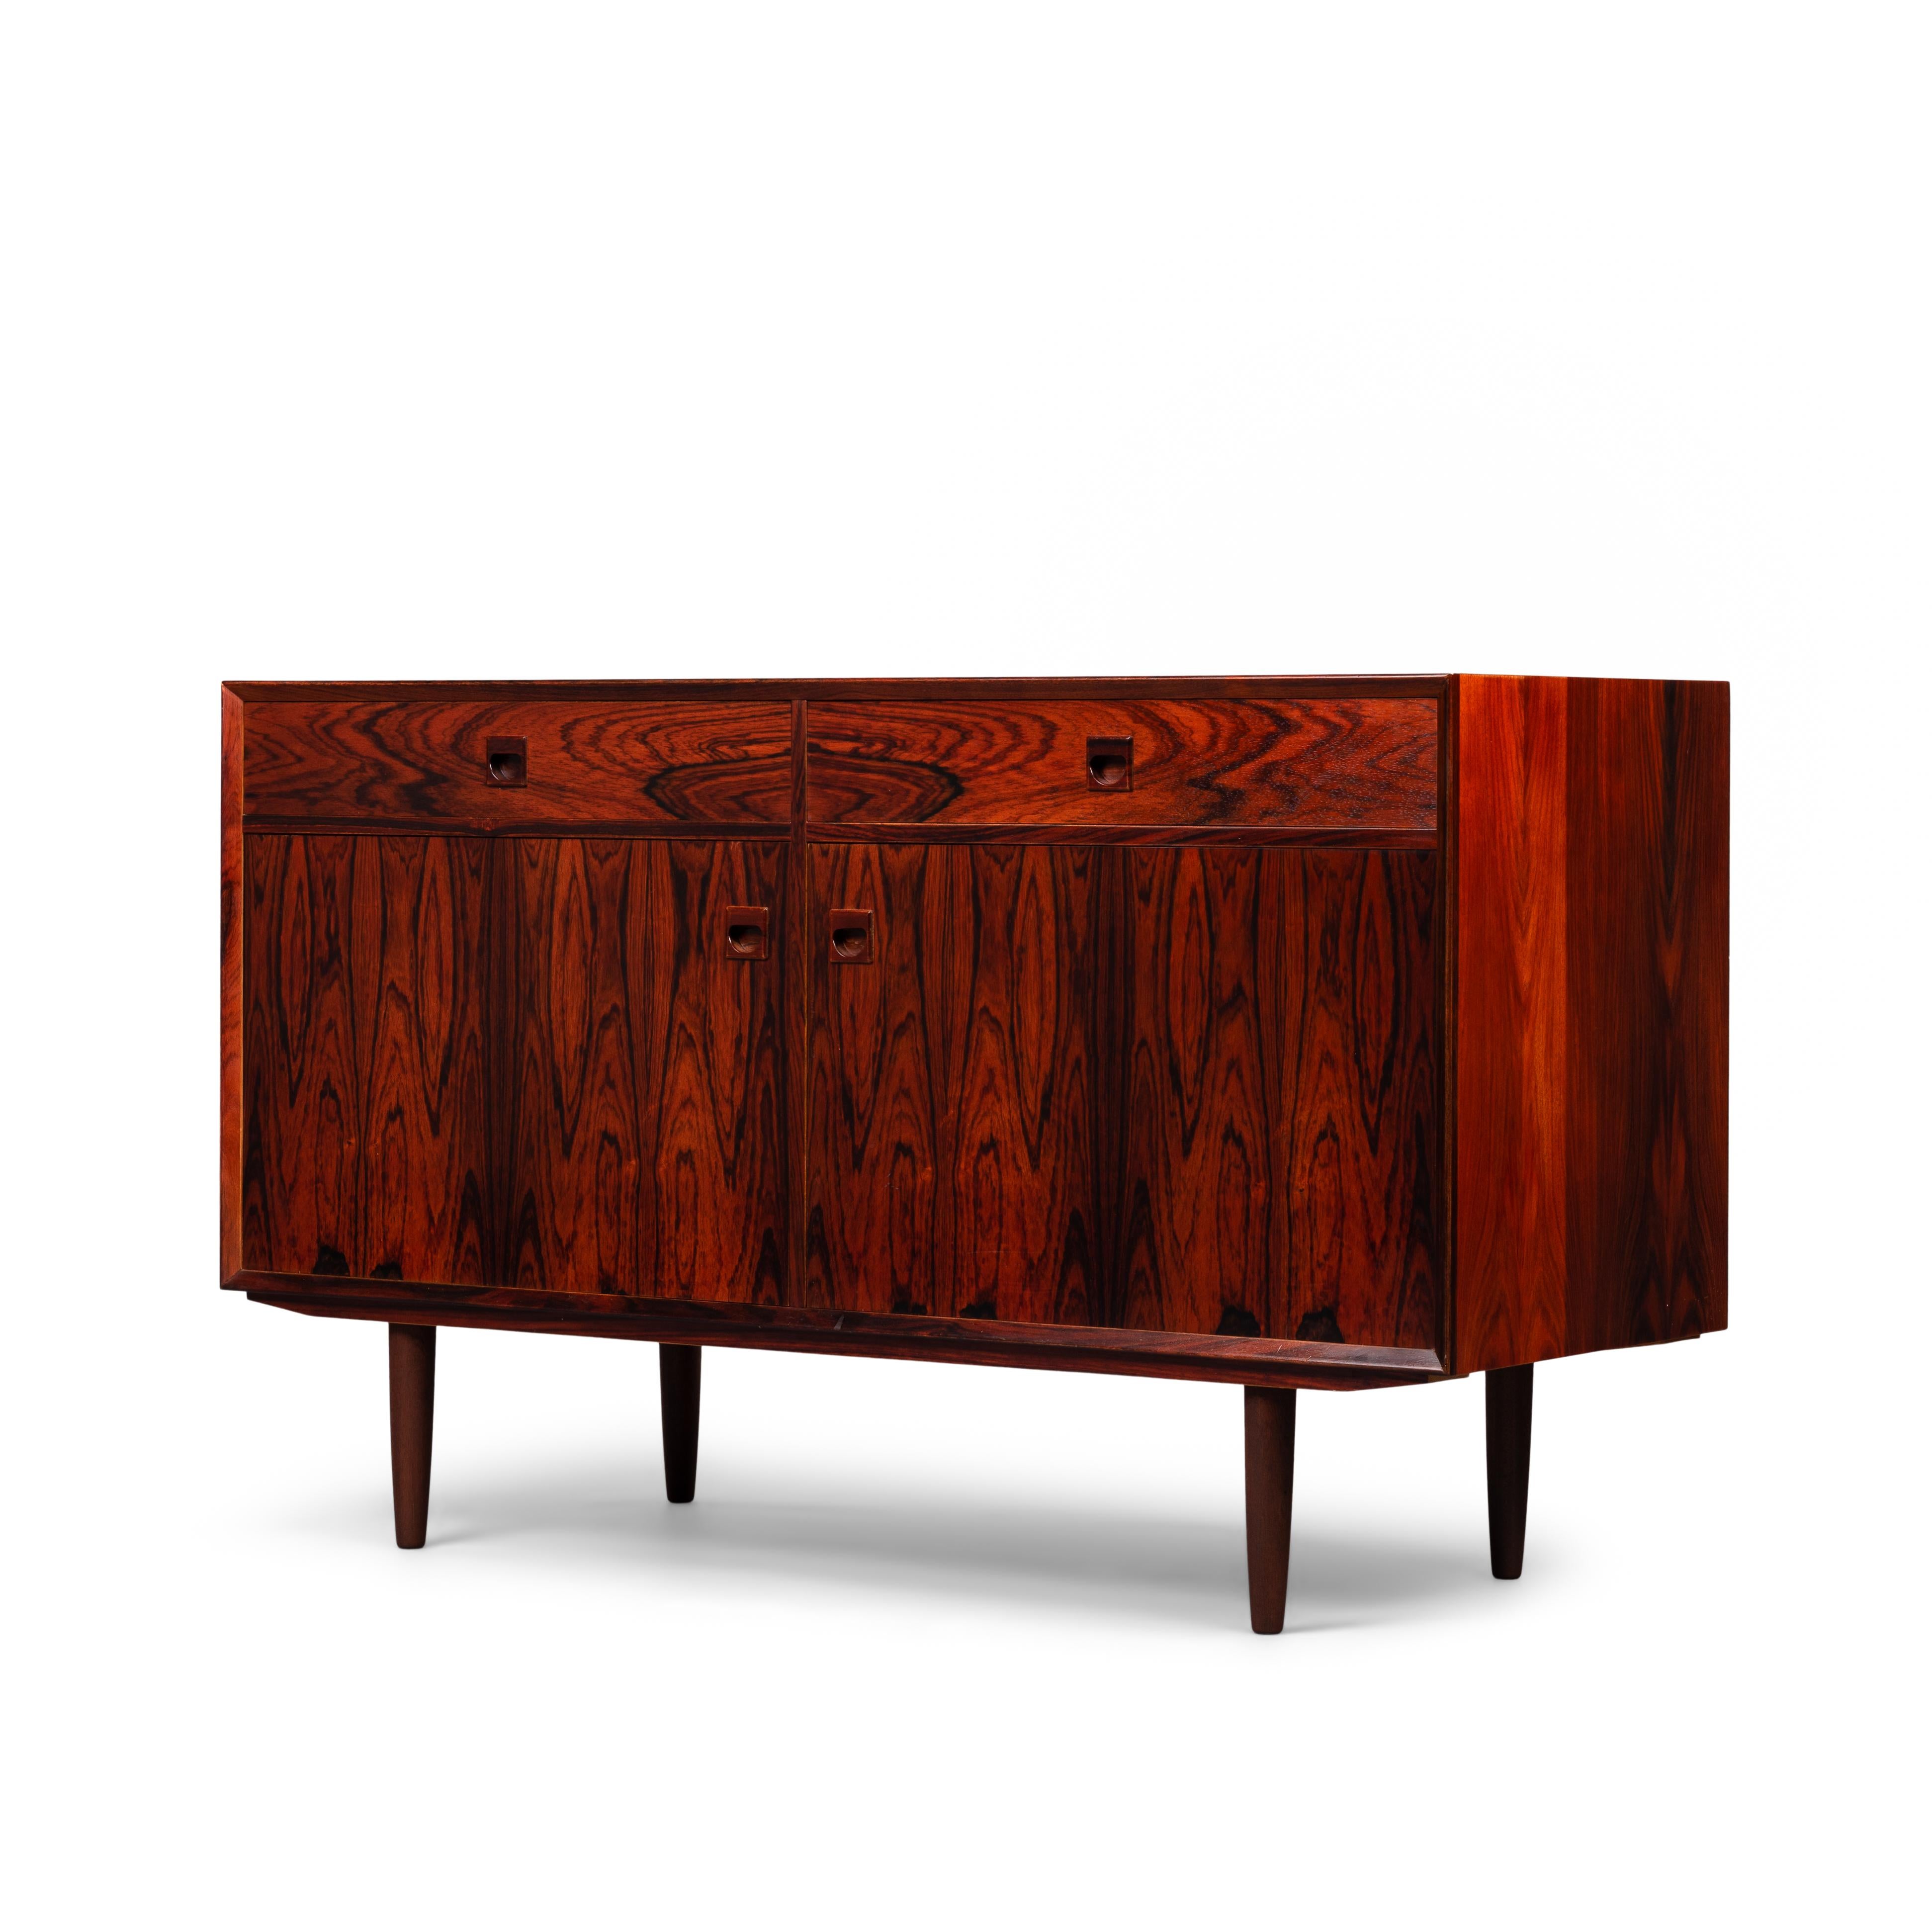 This medium sized sideboard is all about the print and colour of the hardwood veneer. Very much an eye catcher in any modern and light interior. It has the design signature of Brouer all over it with it's top veneer in dark red colour and a superb